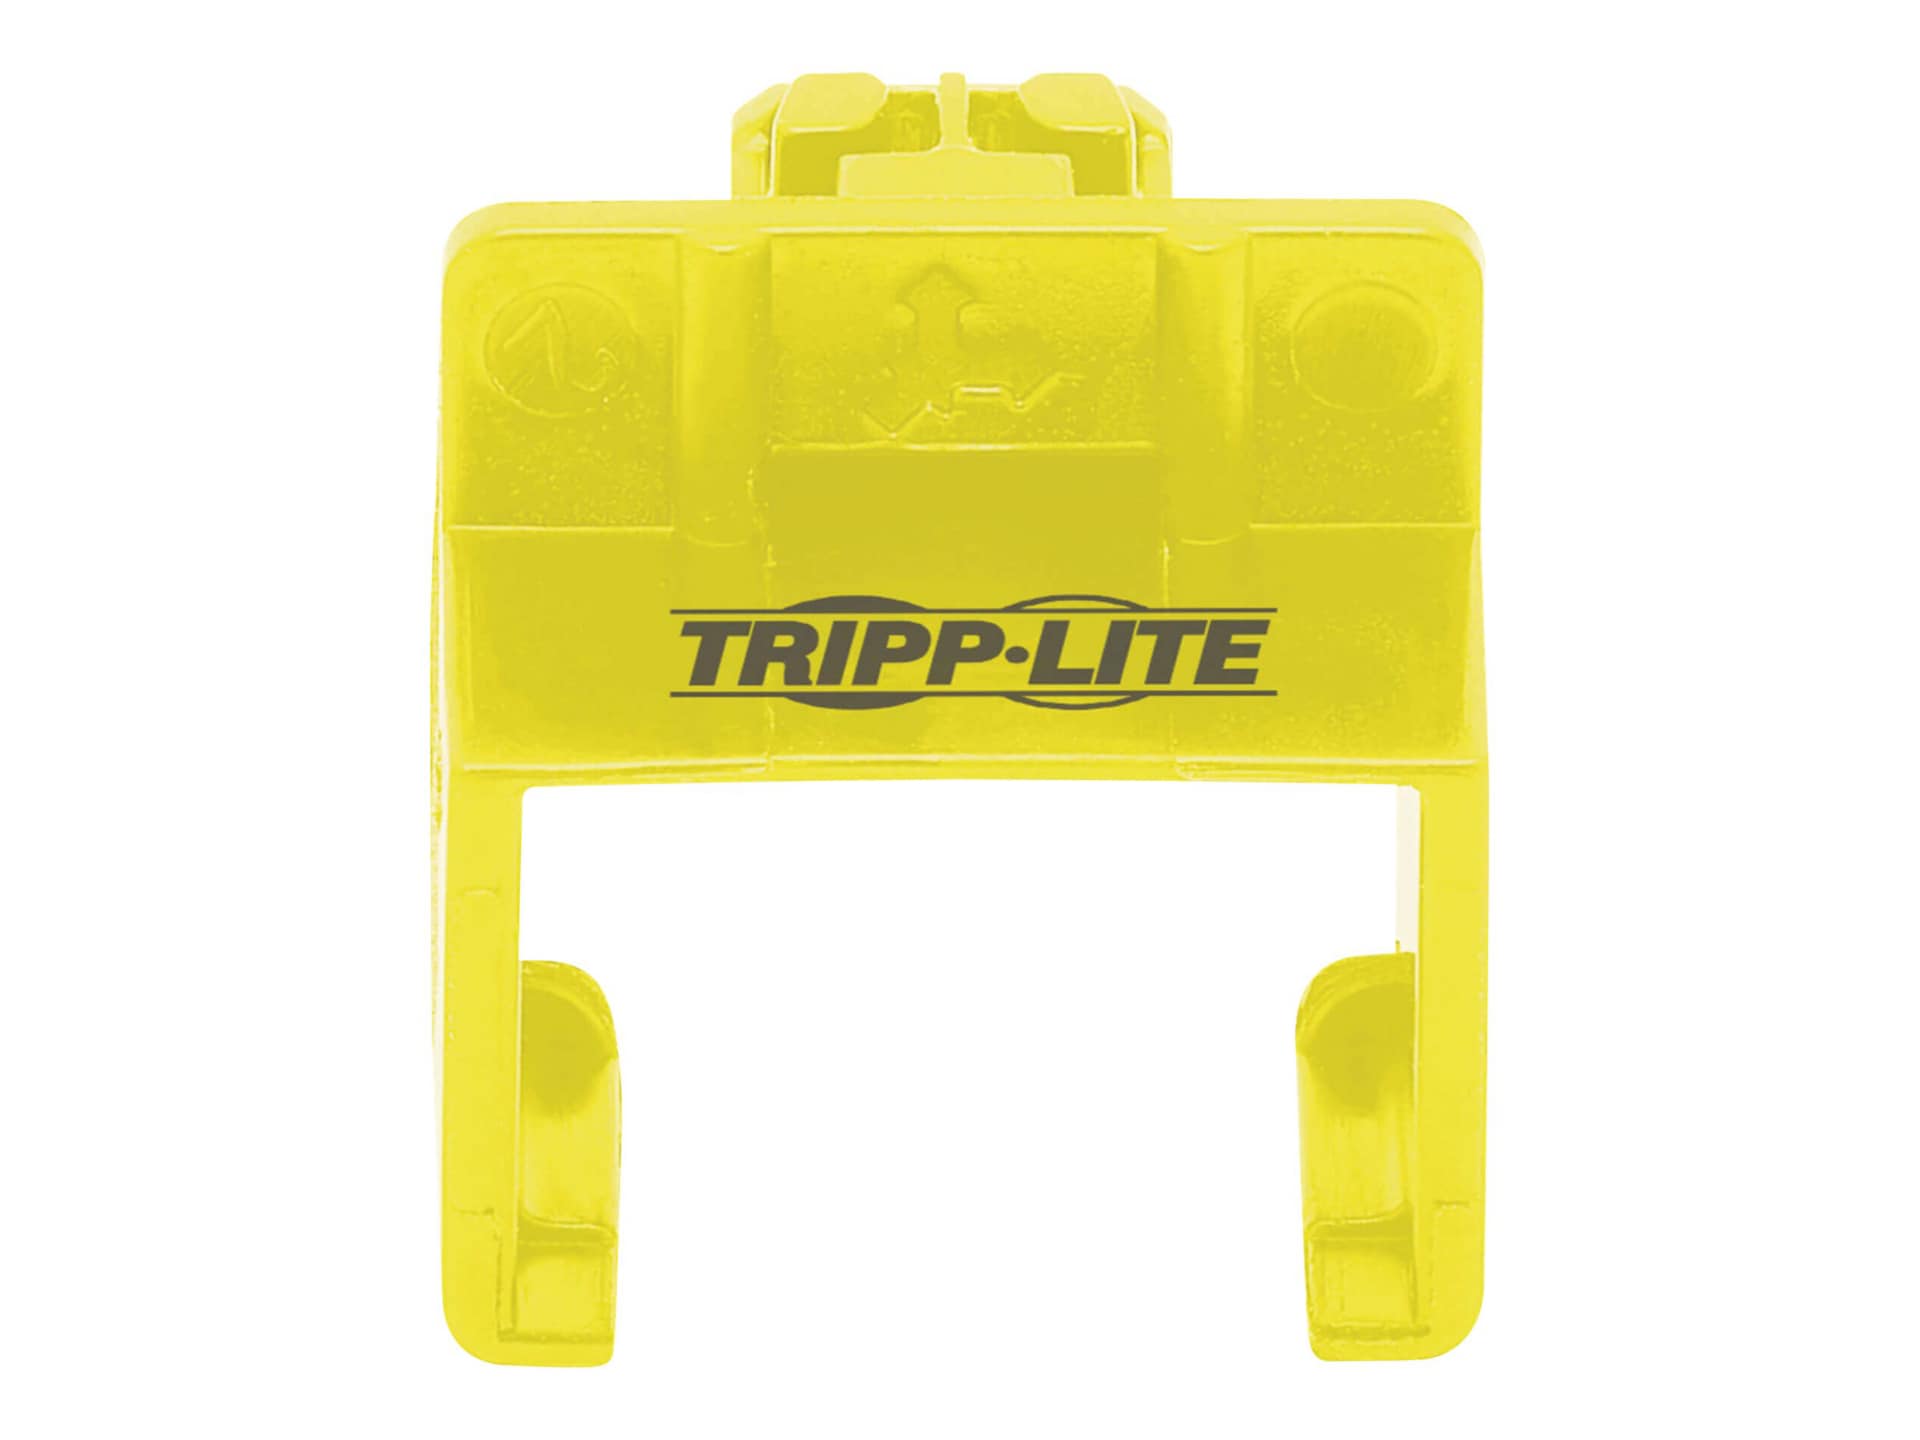 Tripp Lite Universal RJ45 Locking Inserts, Yellow, 10 Pack - cable removal lock